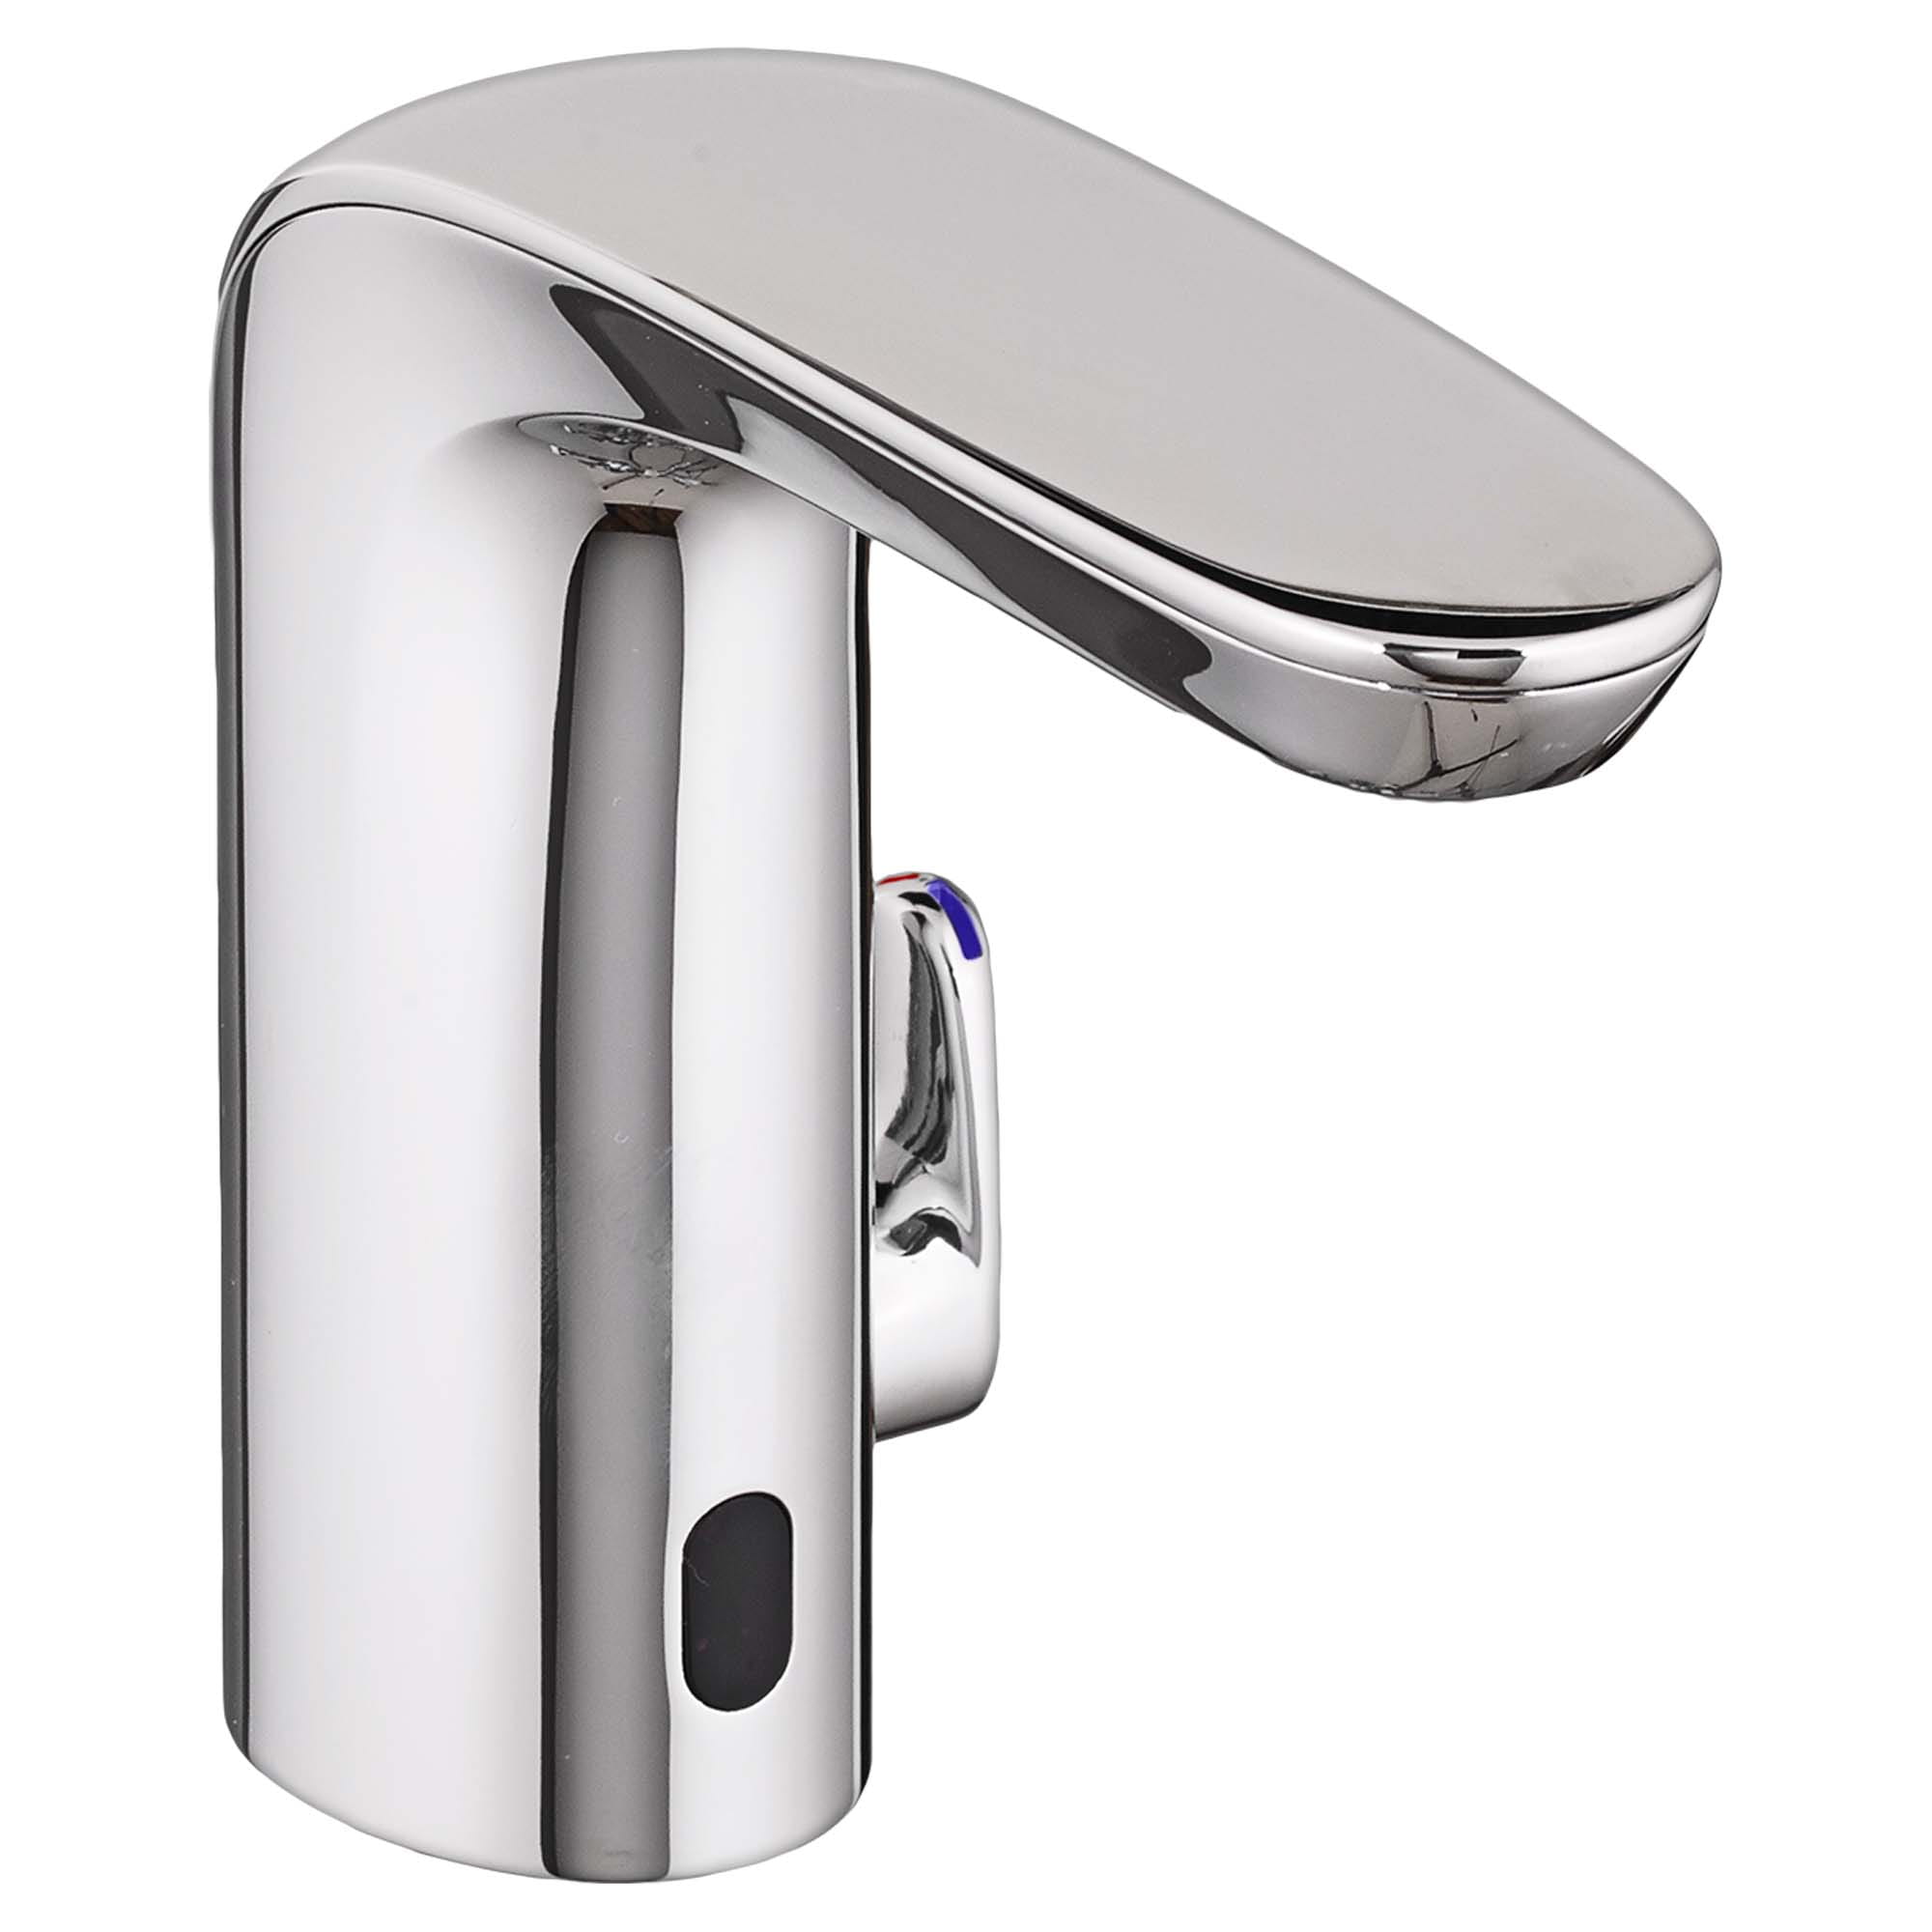 NextGen Selectronic Touchless Faucet Battery Powered With Above Deck Mixing 05 gpm 19 Lpm CHROME